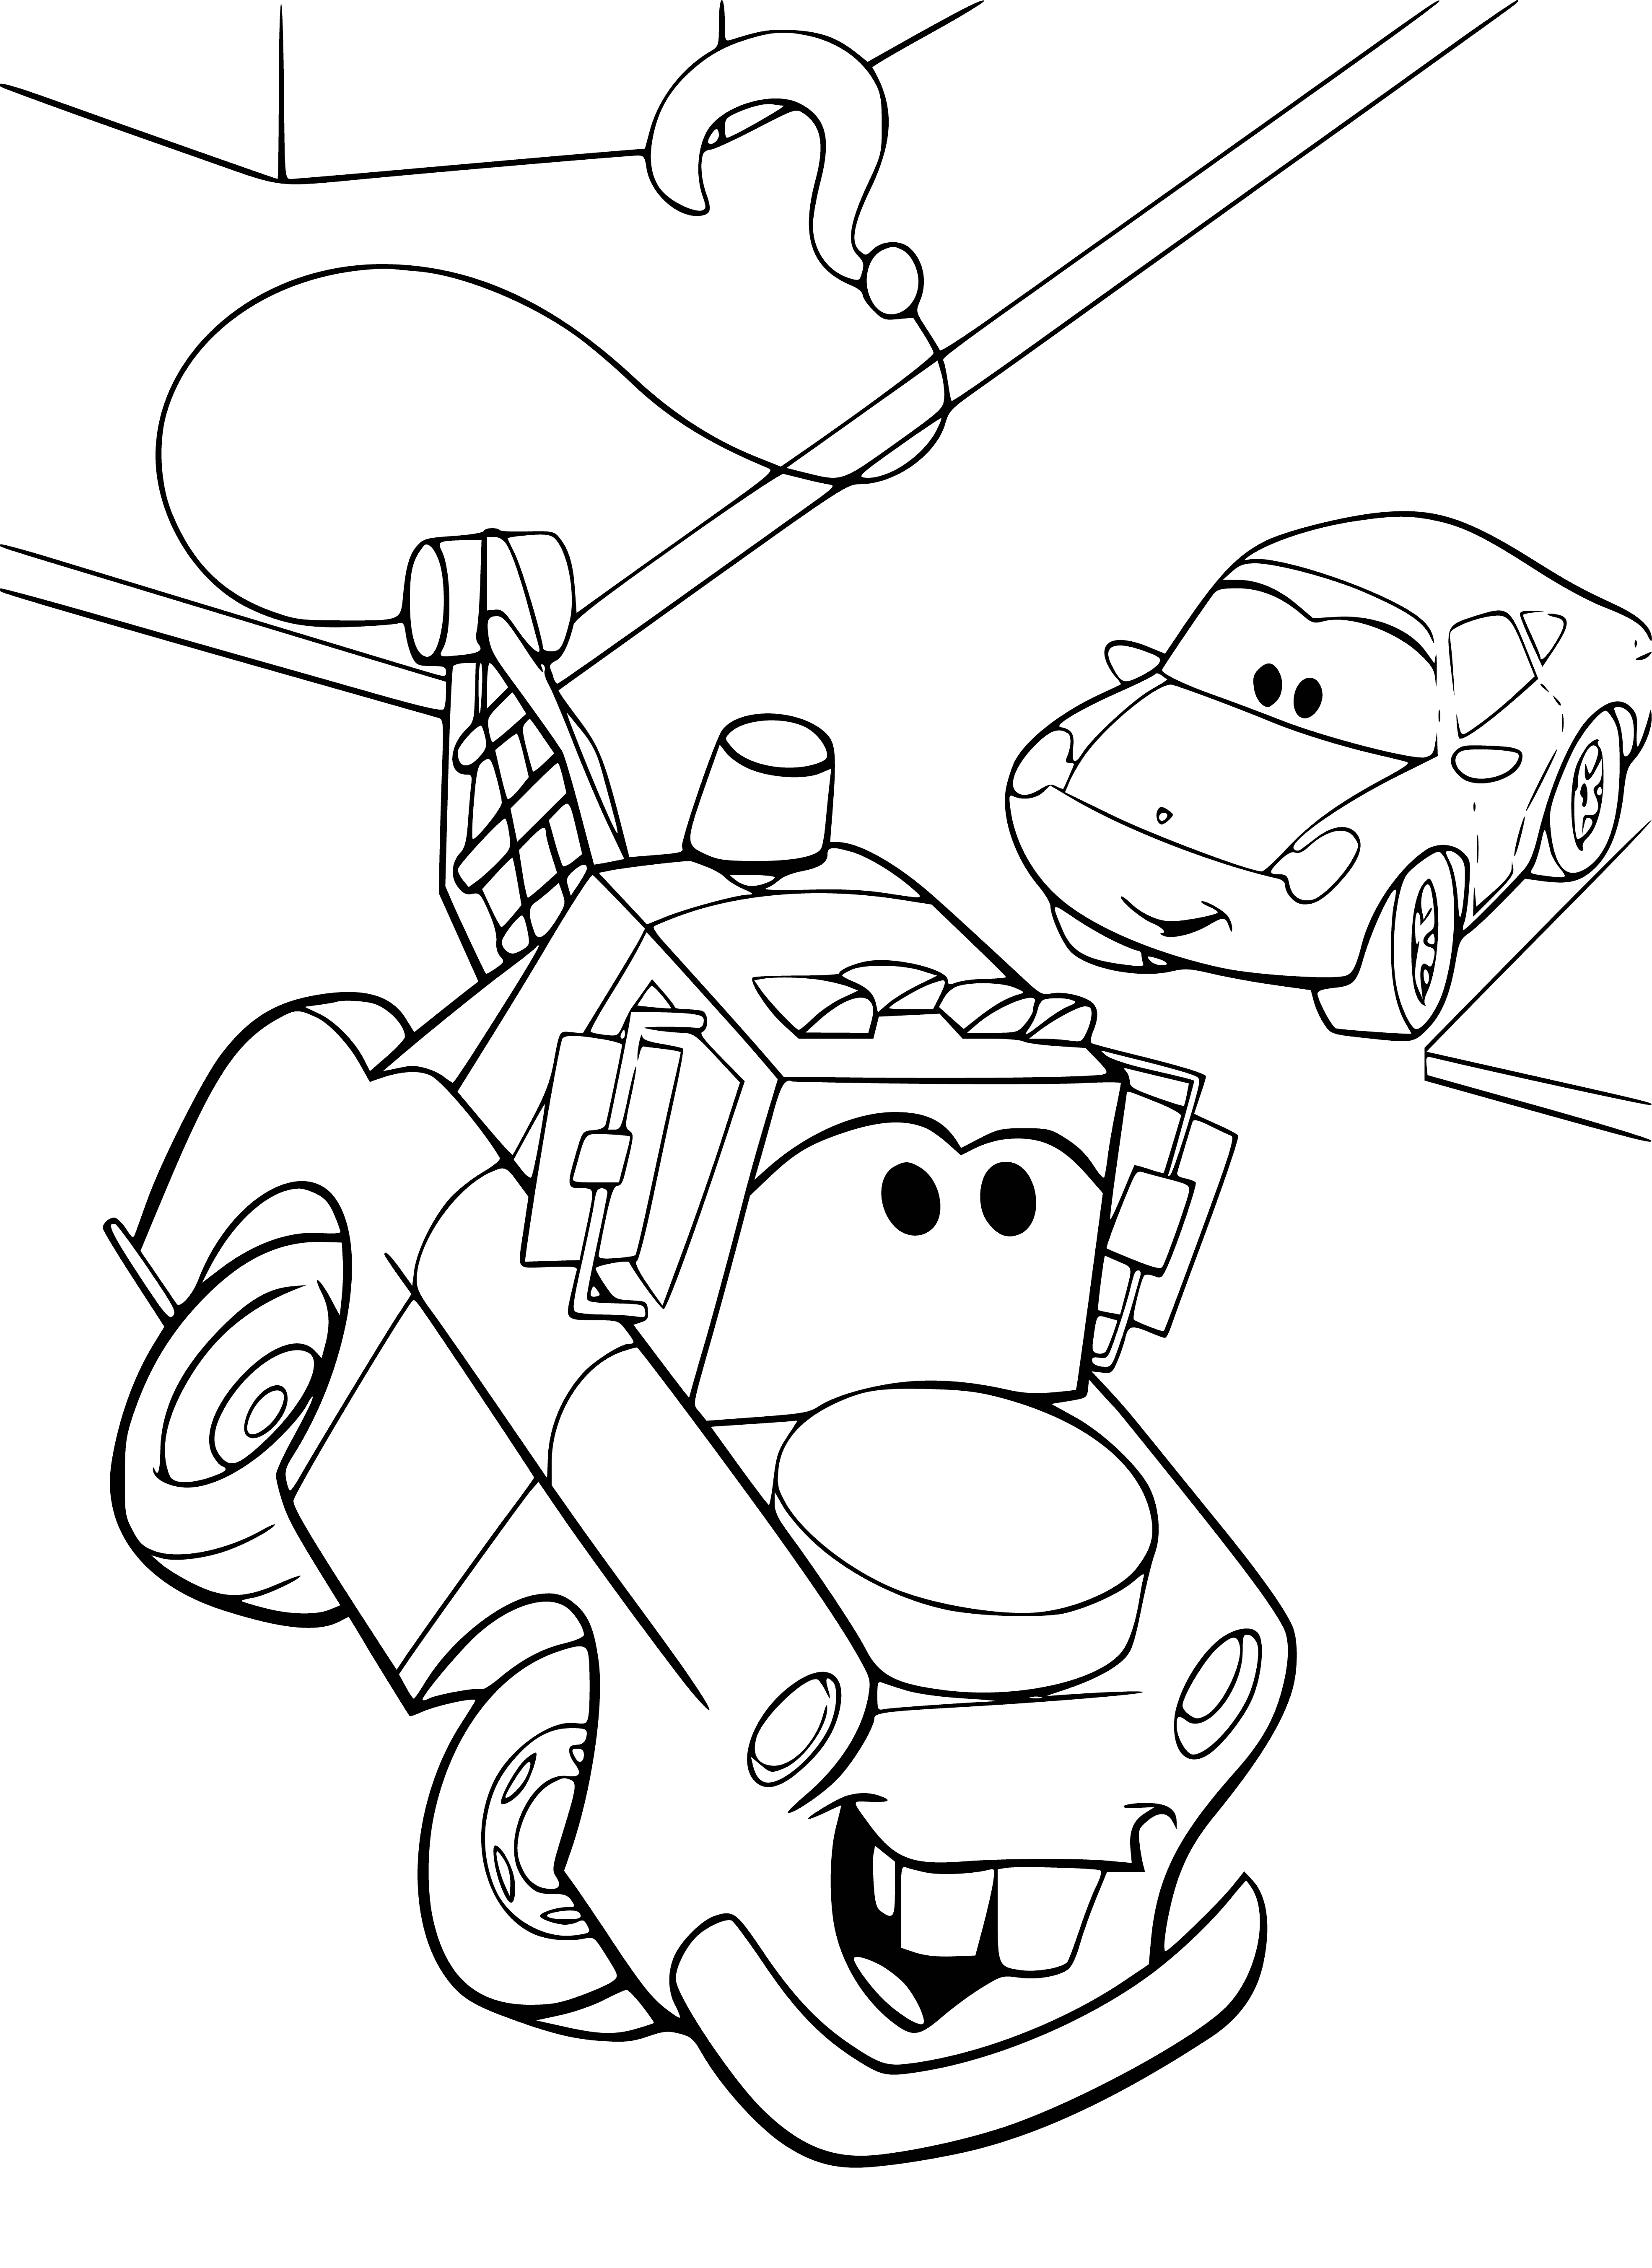 Friends of Lightning McQueen coloring page